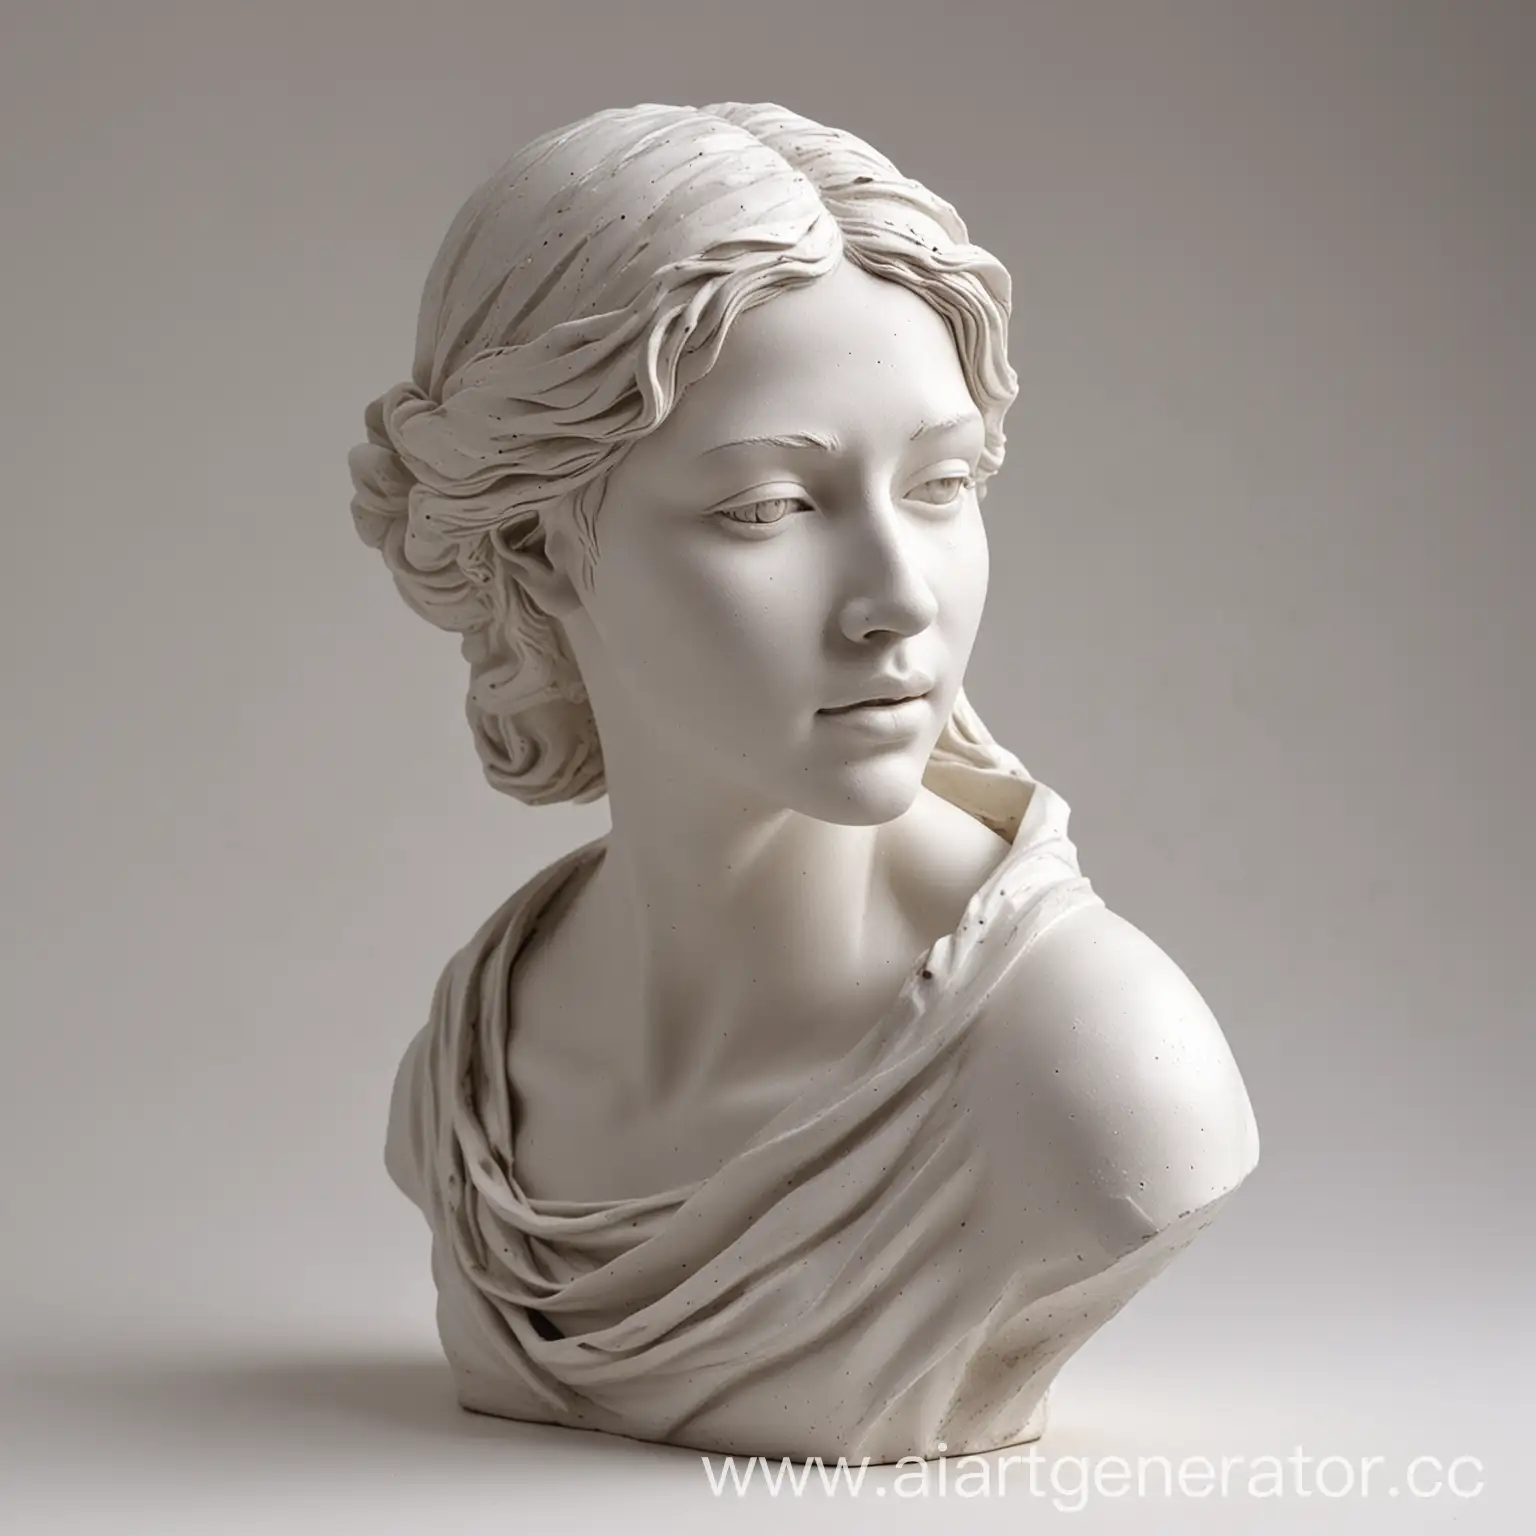 Elegant-White-Ceramic-Sculpture-of-a-Woman-in-34-Angle